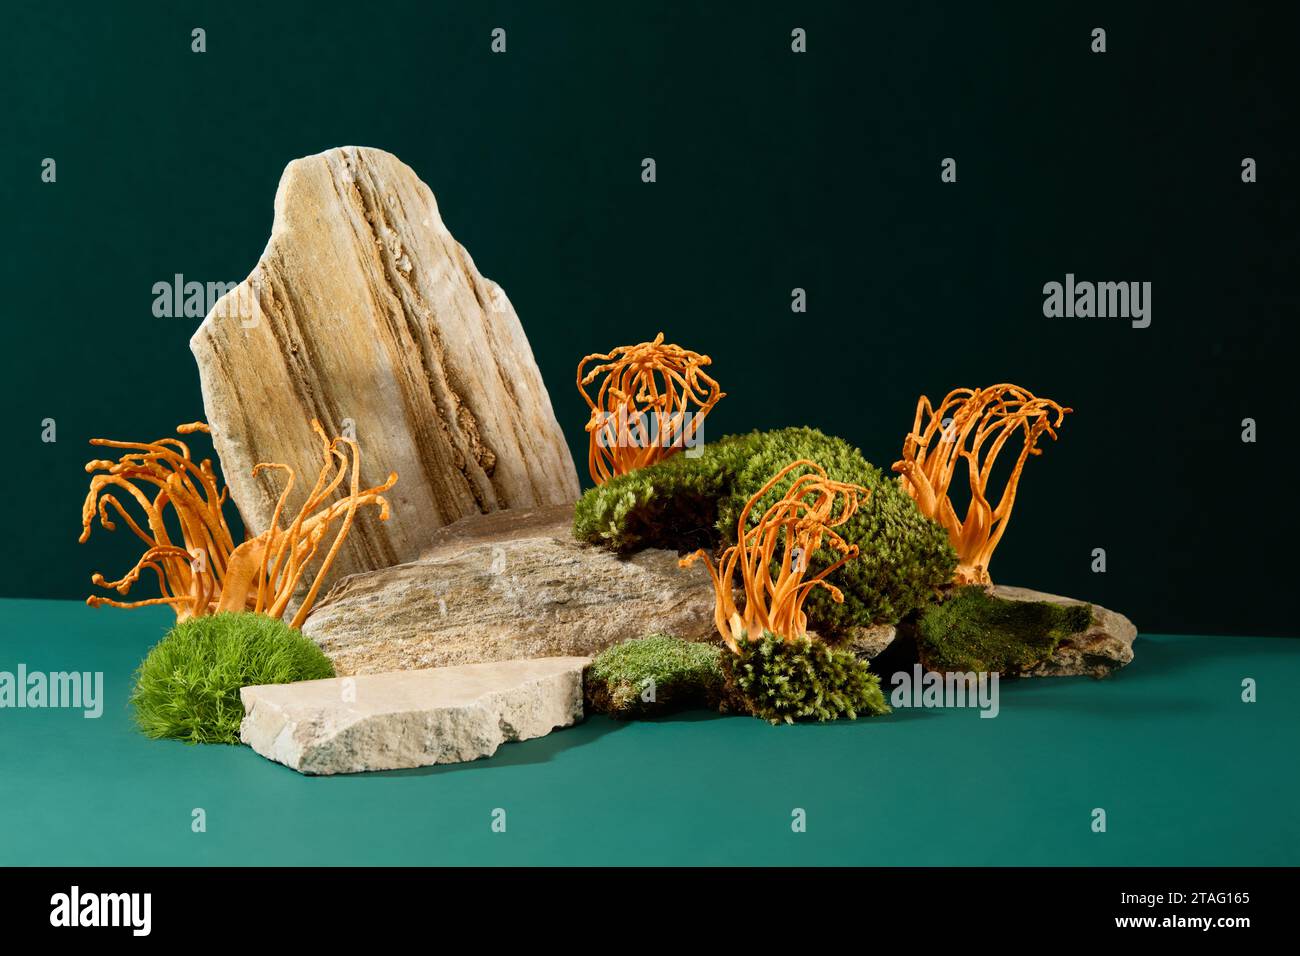 On a dark green background, stone slabs, cordyceps and green moss are displayed. Cordyceps contains the rare substance Selenium, which can help streng Stock Photo